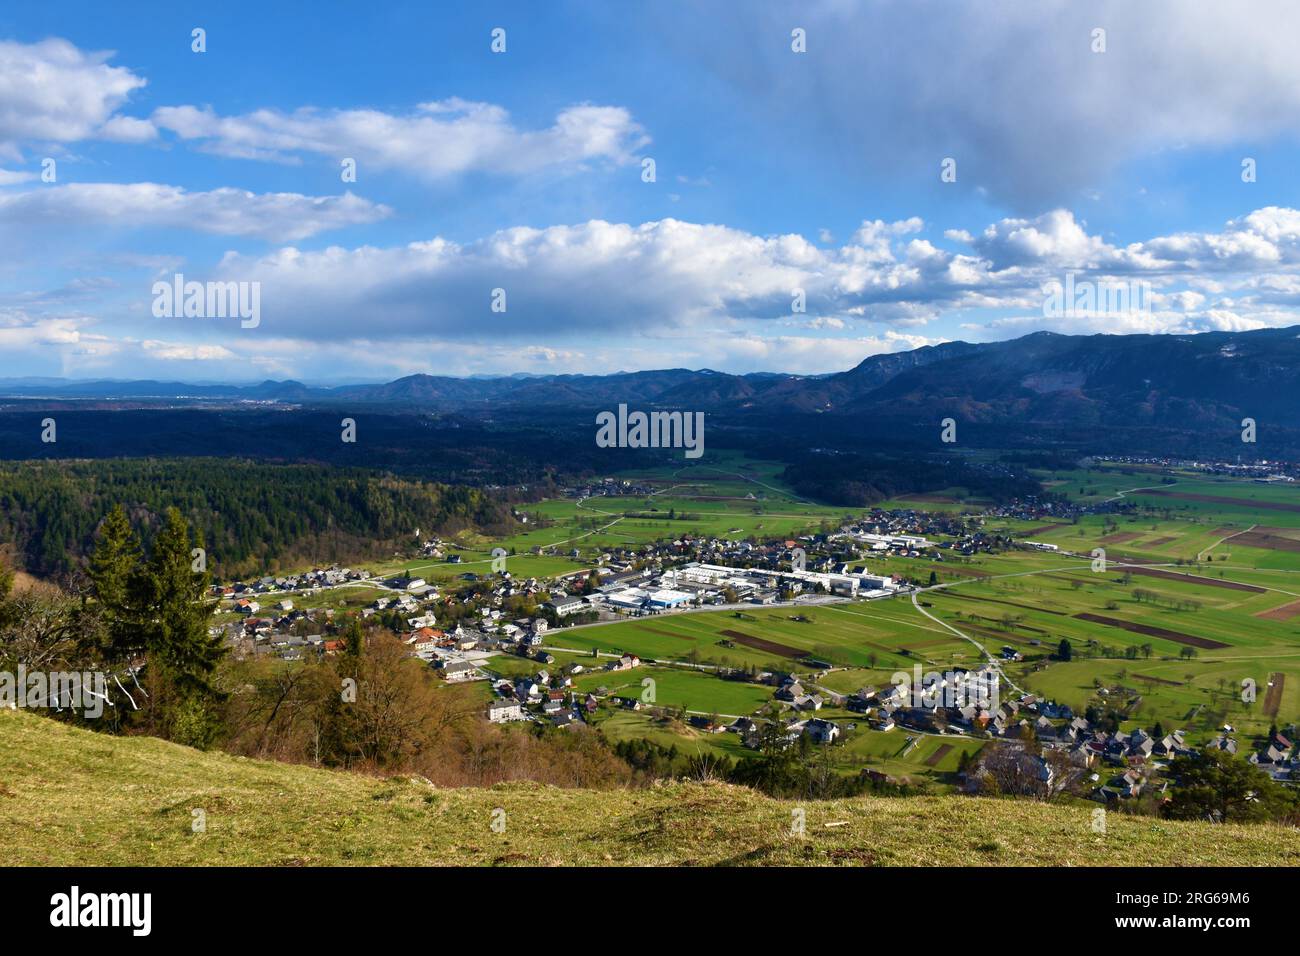 View of Begunje na Gorenjskem village in Slovenia surrounded by fields and forest Stock Photo